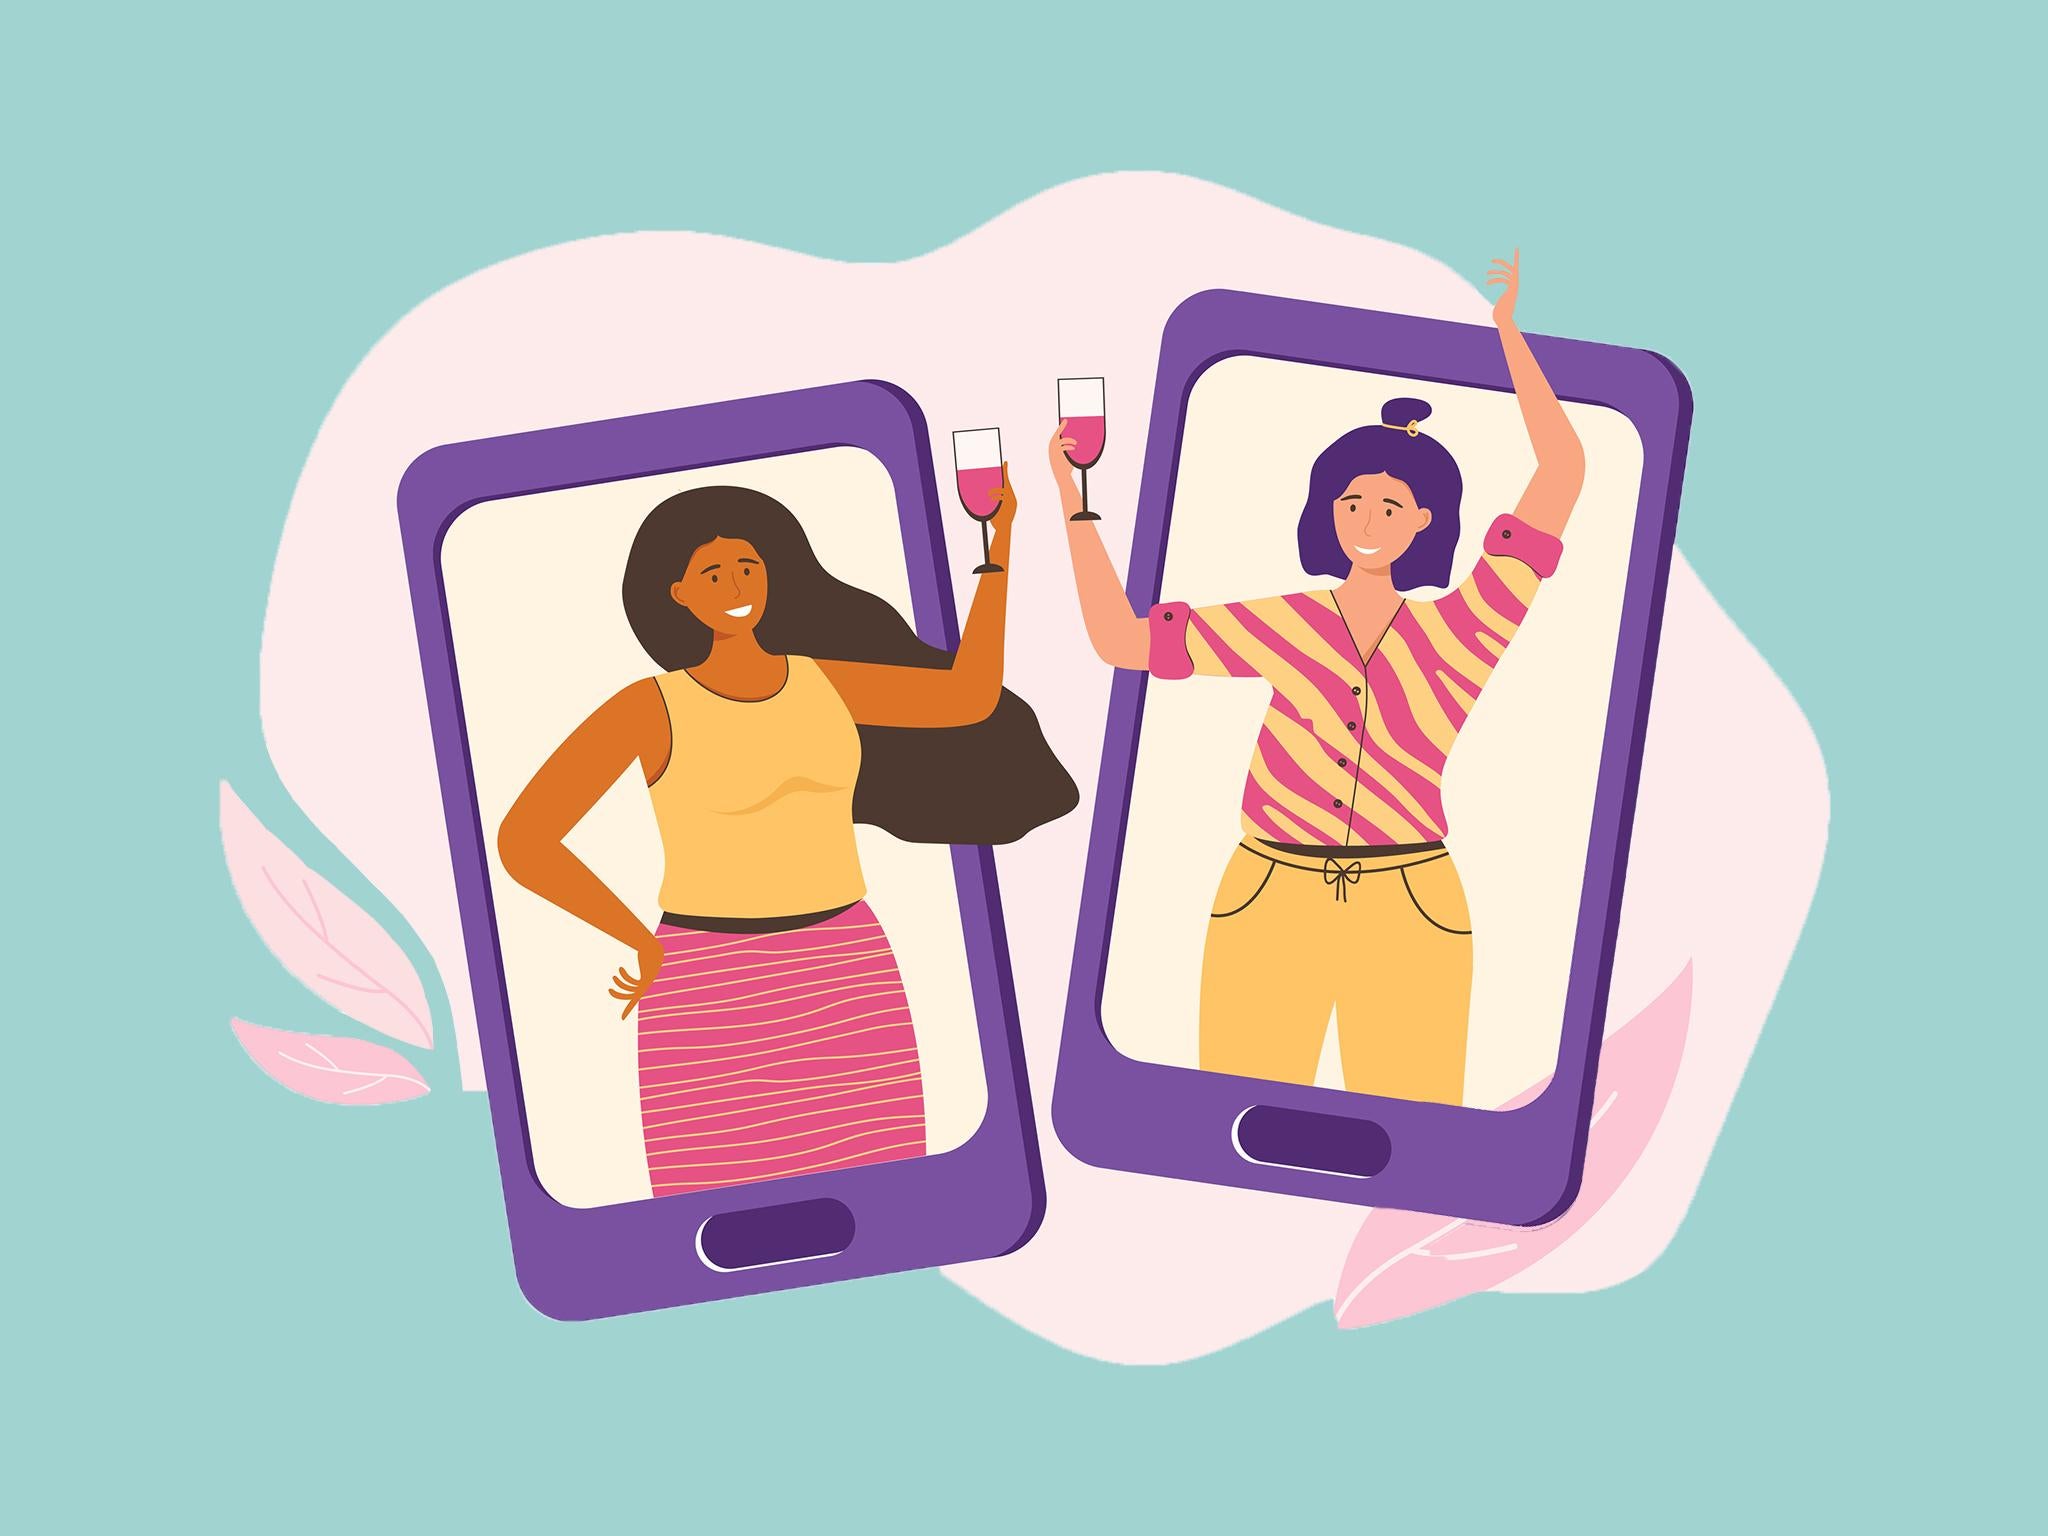 While you might not be able to meet up, you can still have a hen-do to remember thanks to platforms like zoom, Smule and Paperless Post